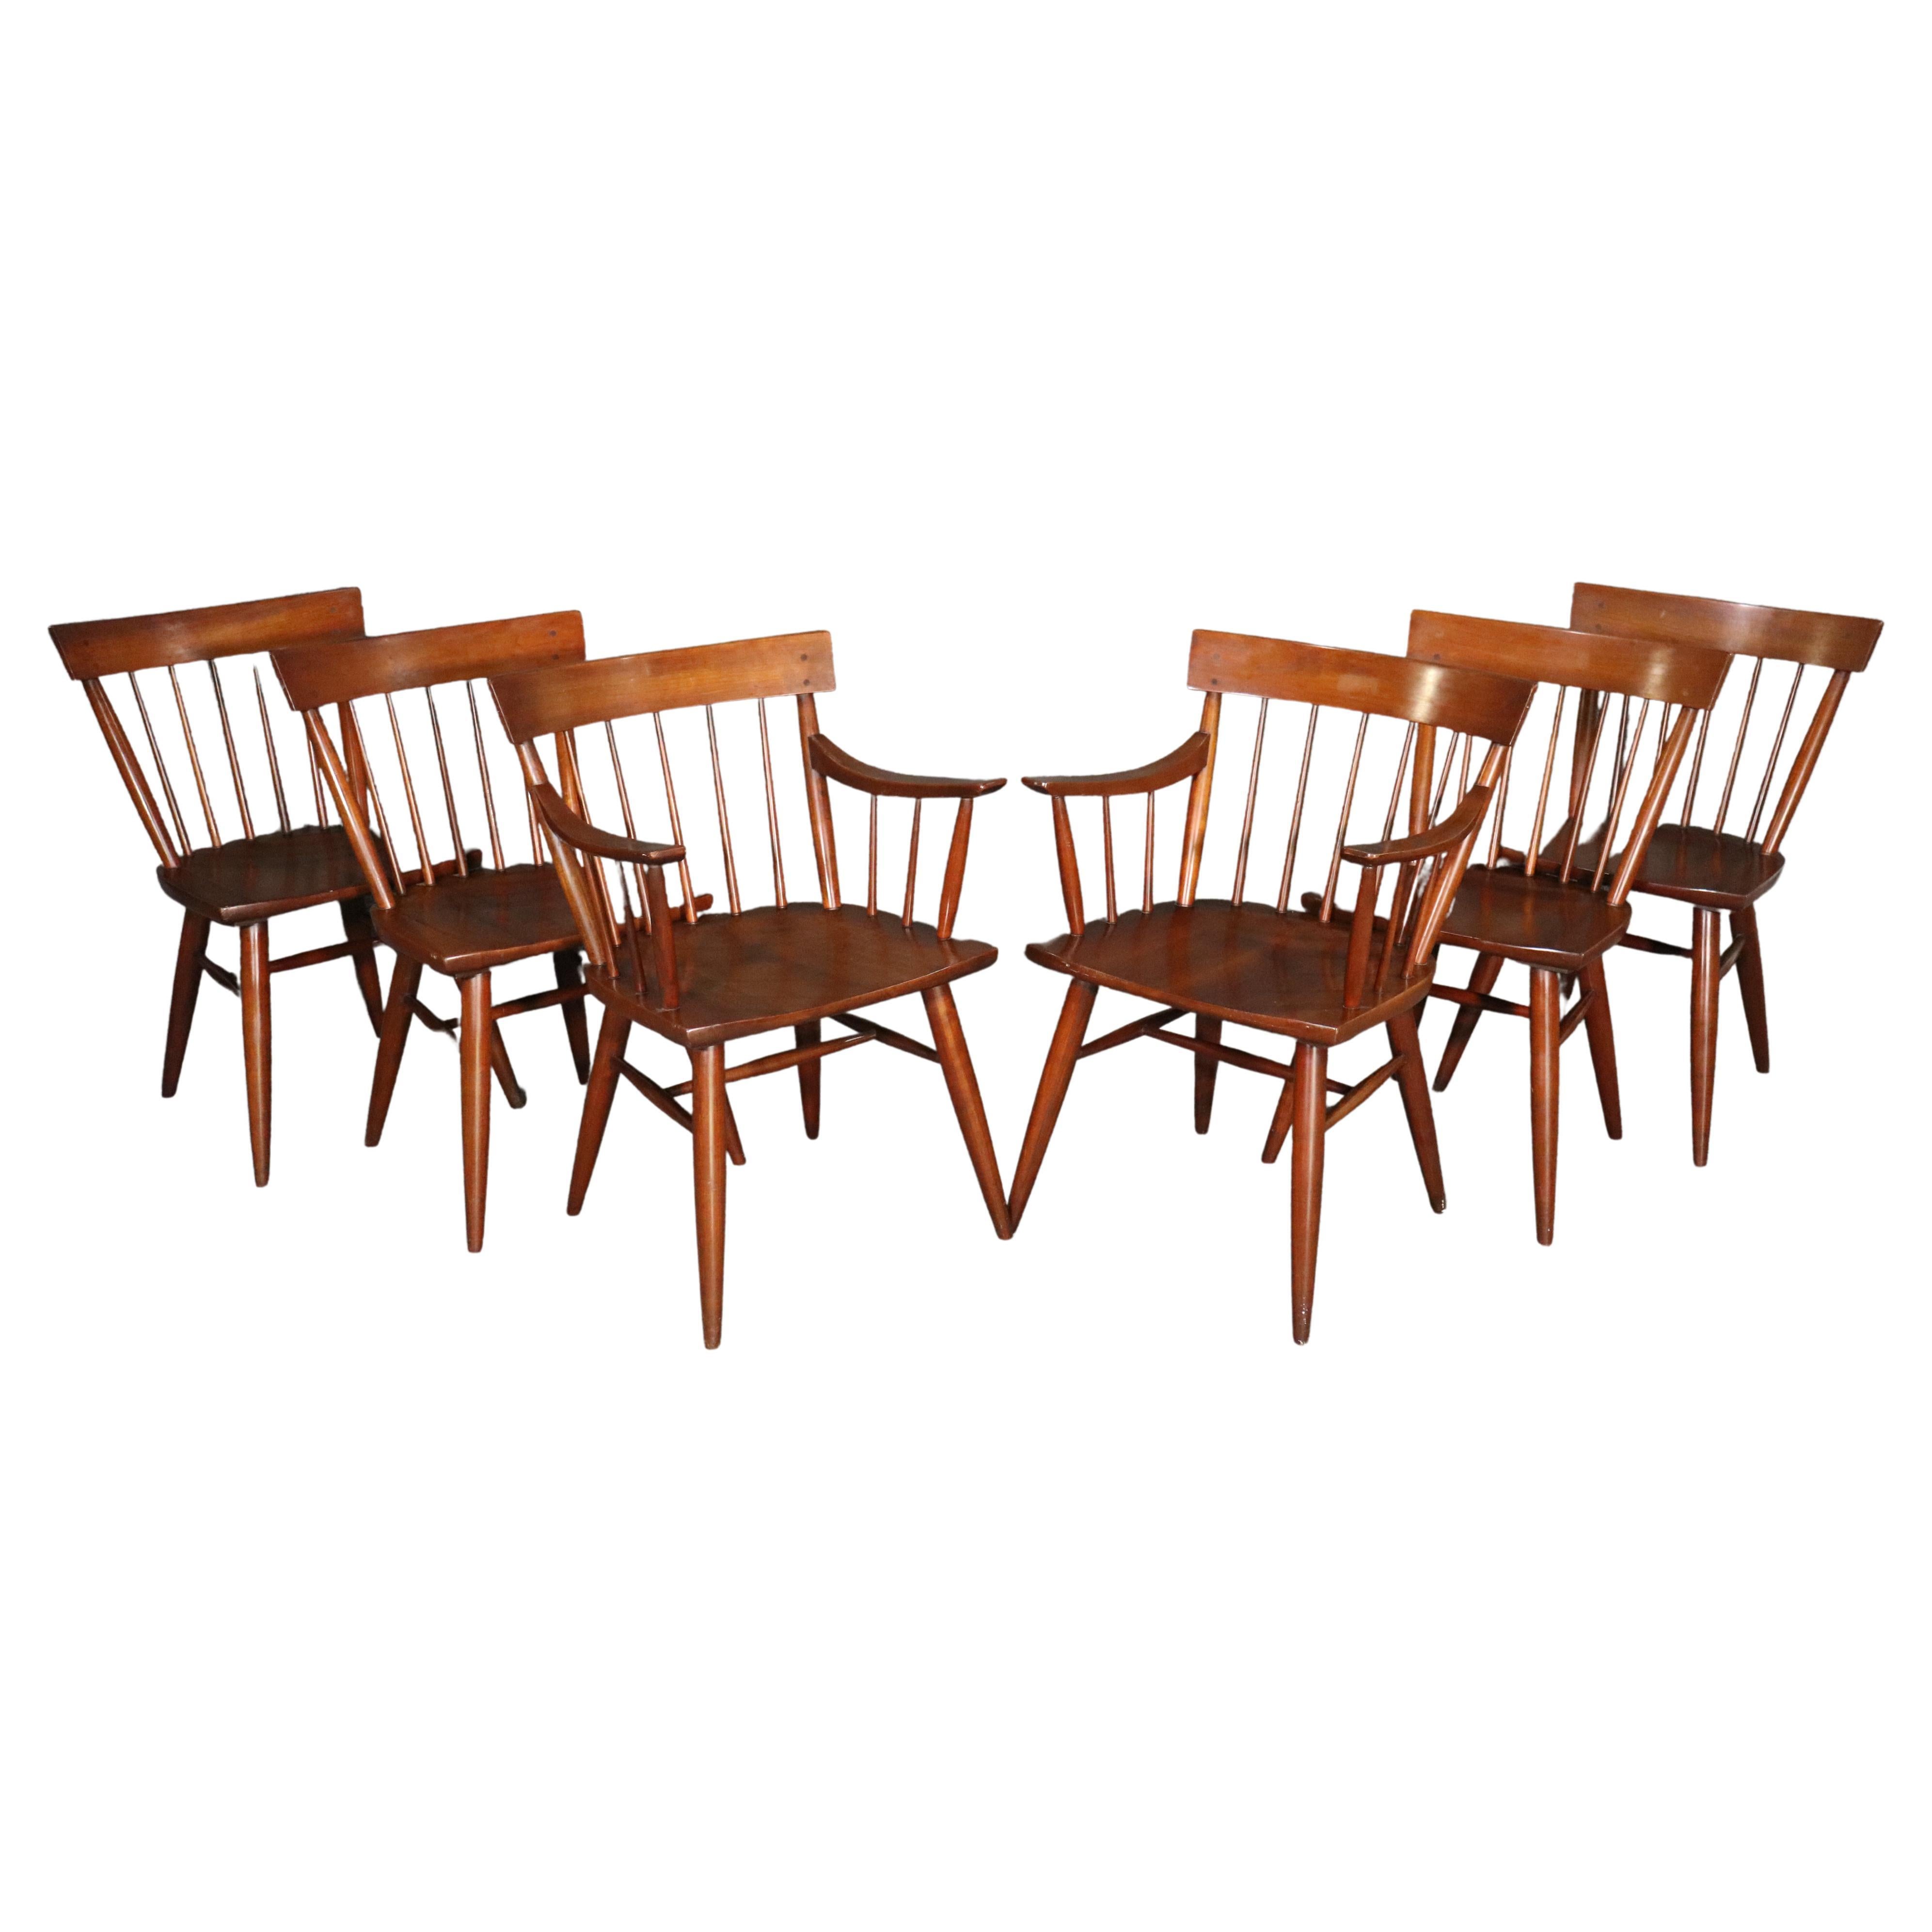 Paul McCobb Style Spindle Chairs